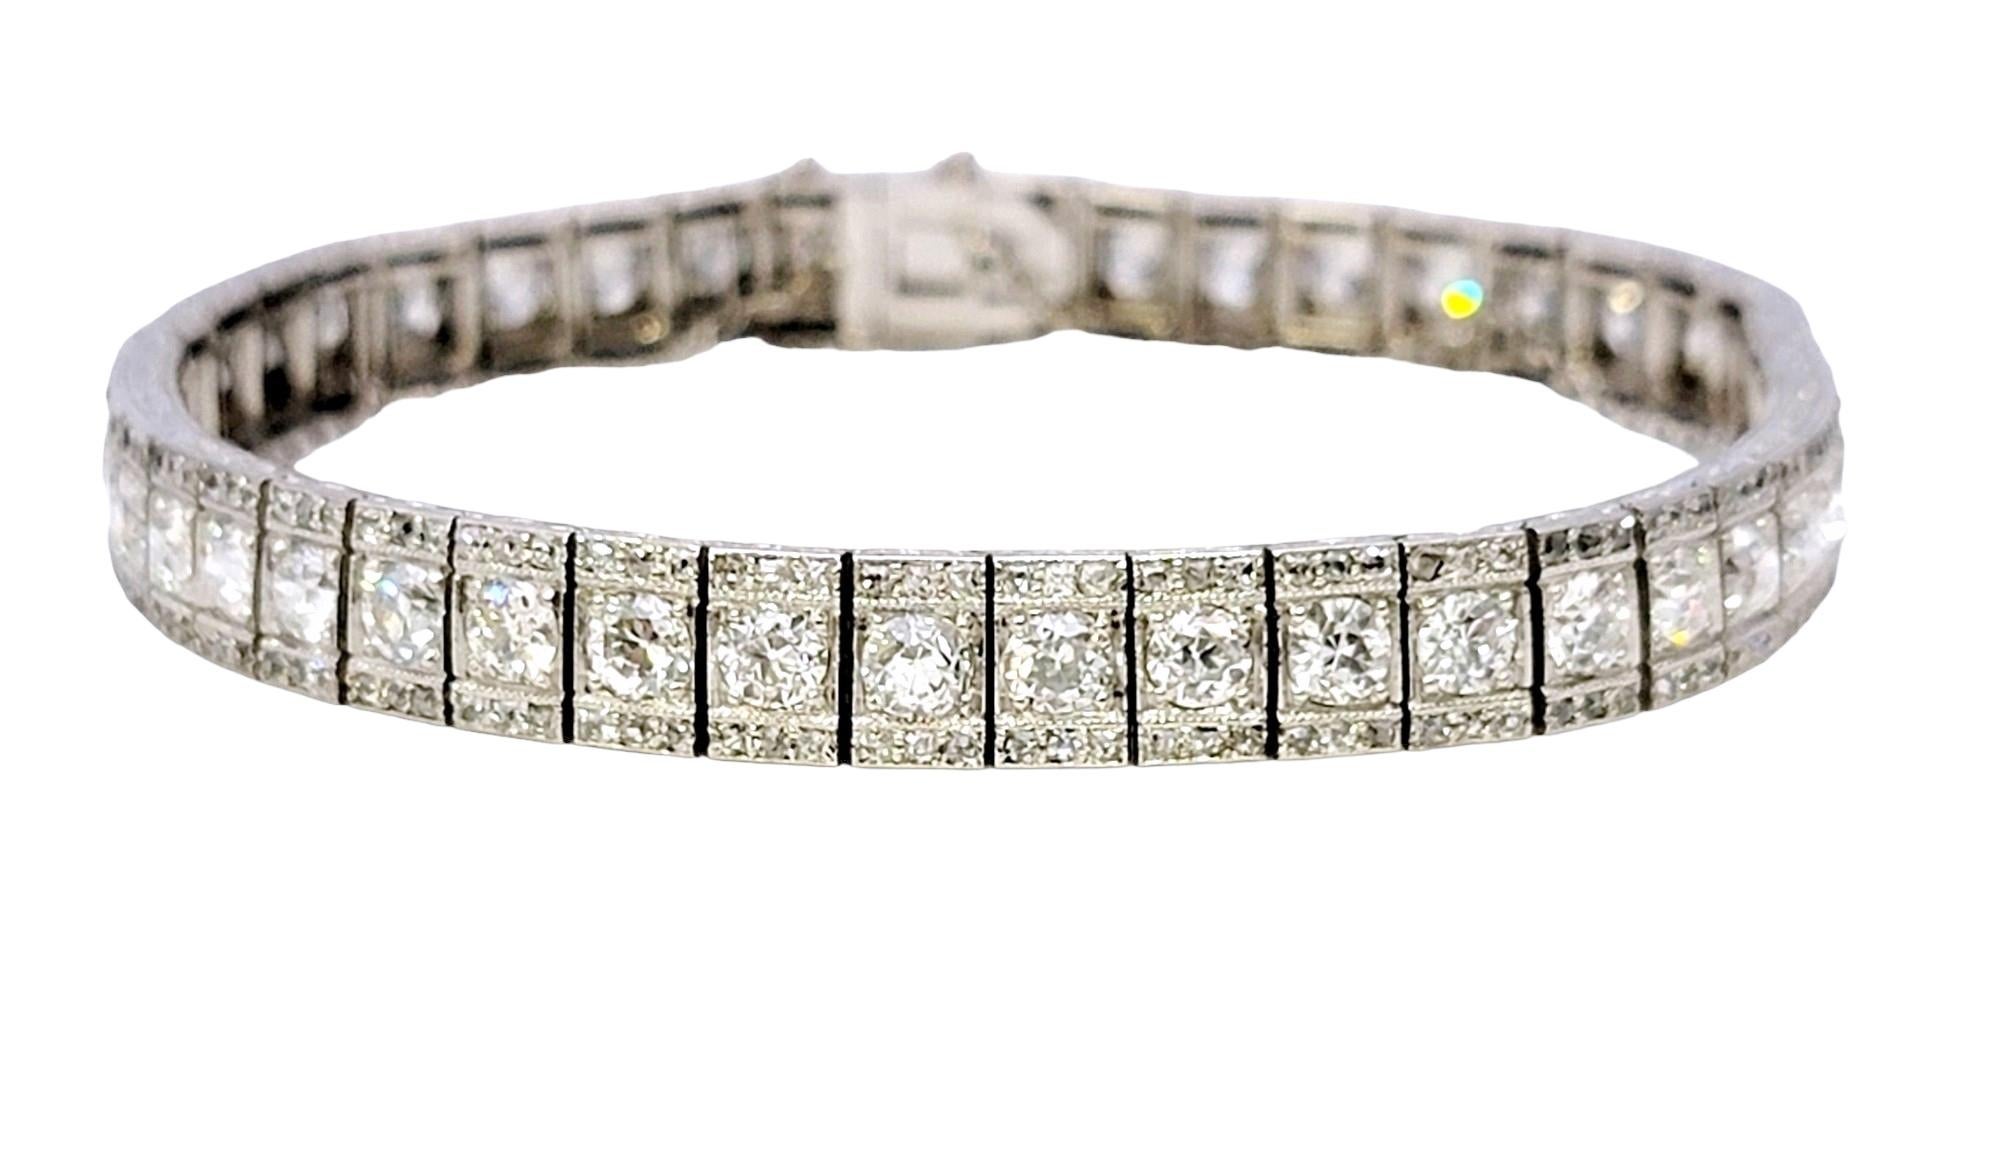 Length: 7 Inches

Shown here is an absolutely breathtaking diamond bracelet from the glamorous era of Art Deco. Opulent and meticulously crafted, this captivating piece will adorn the wrist with unmatched elegance. With its dazzling diamonds,